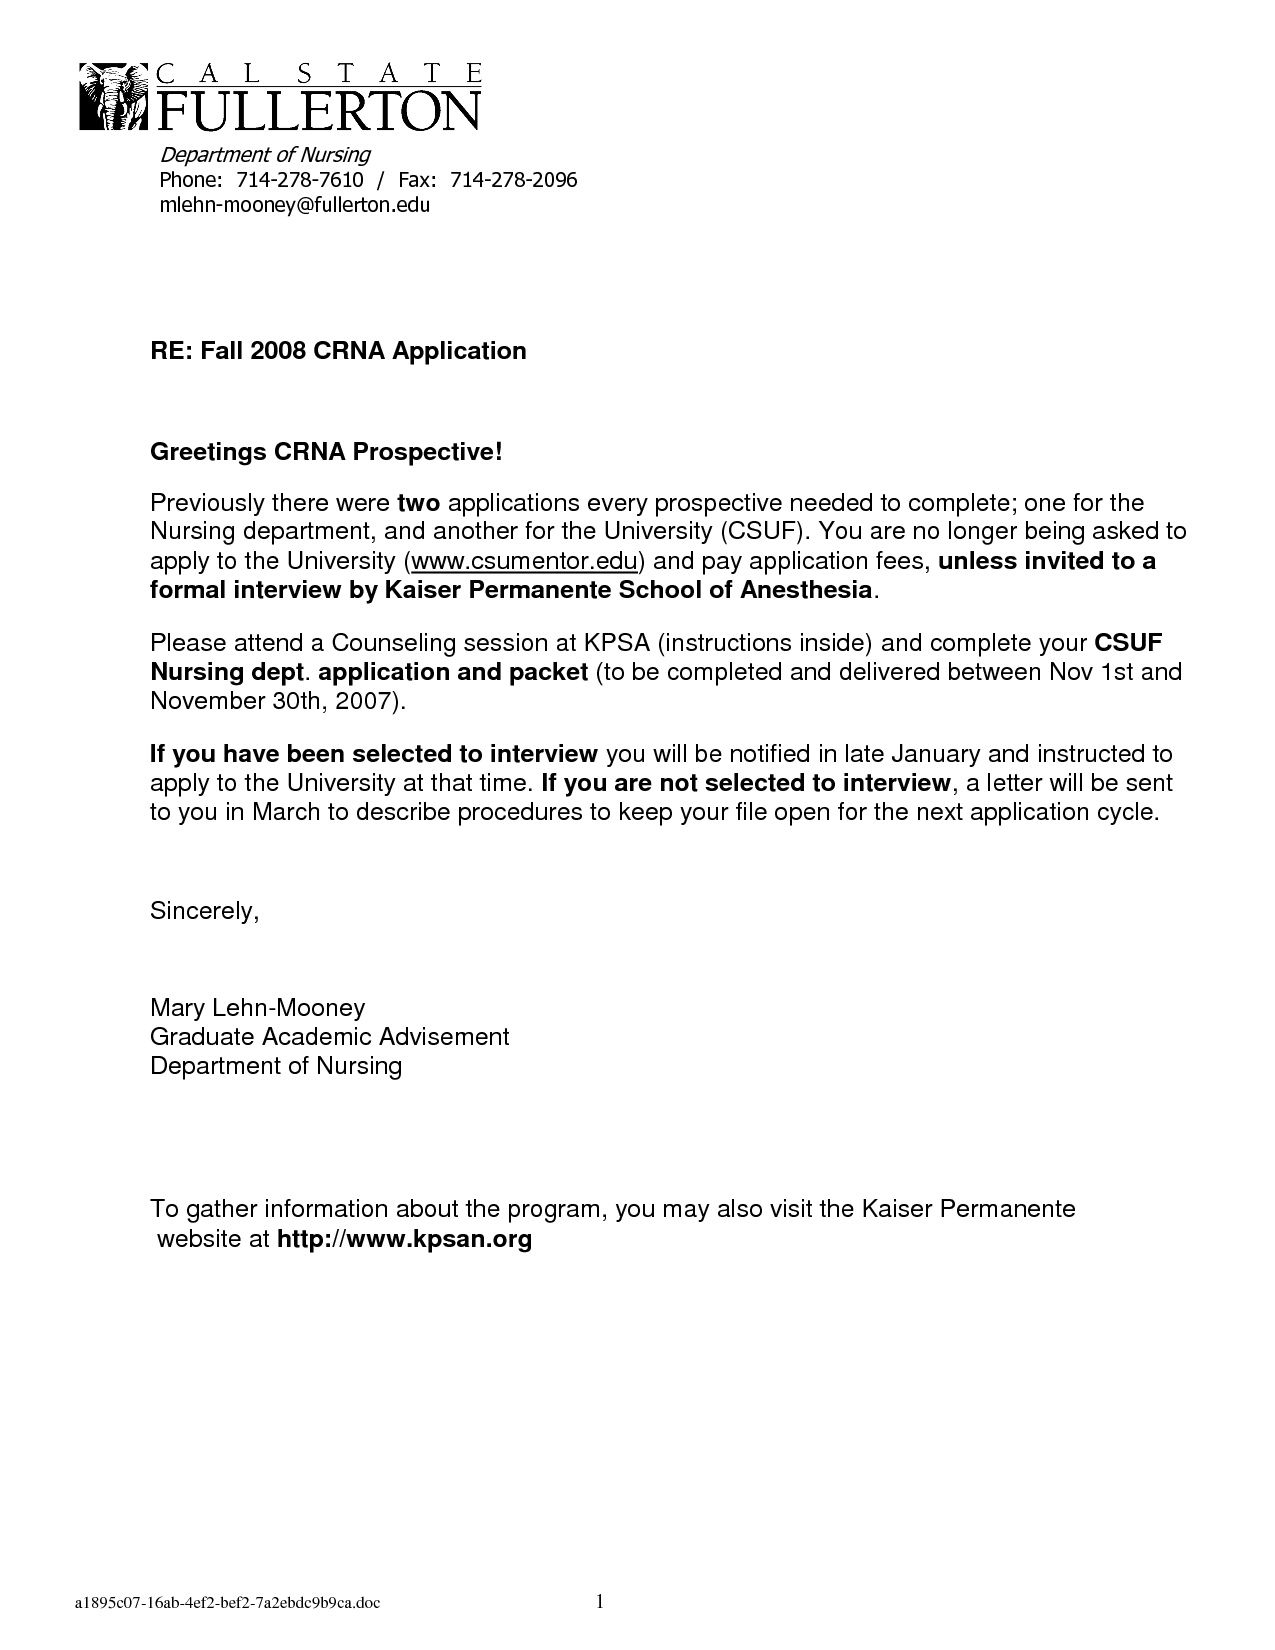 Letter Of Recommendation Cover Letter Debandje within size 1275 X 1650